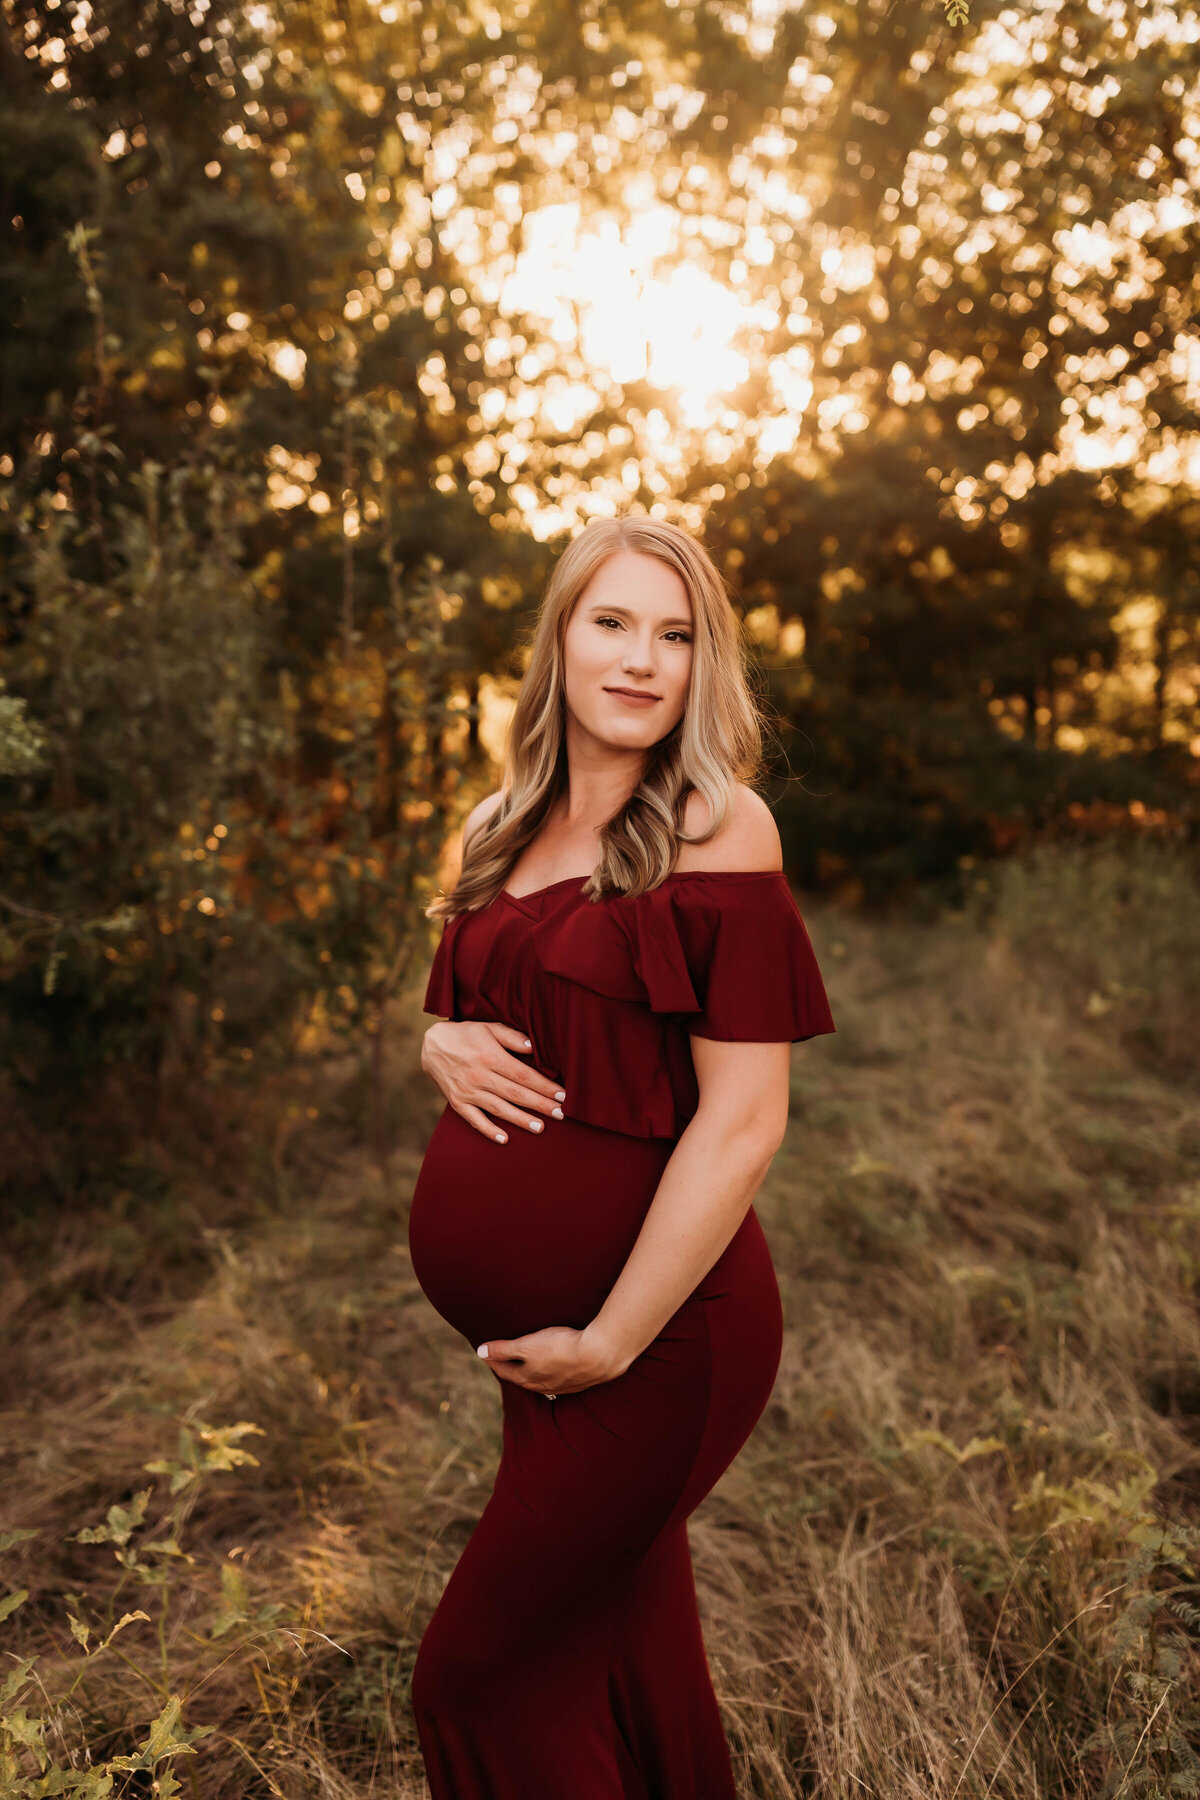 Pregnant mom in a maroon bodycon dress at golden hour